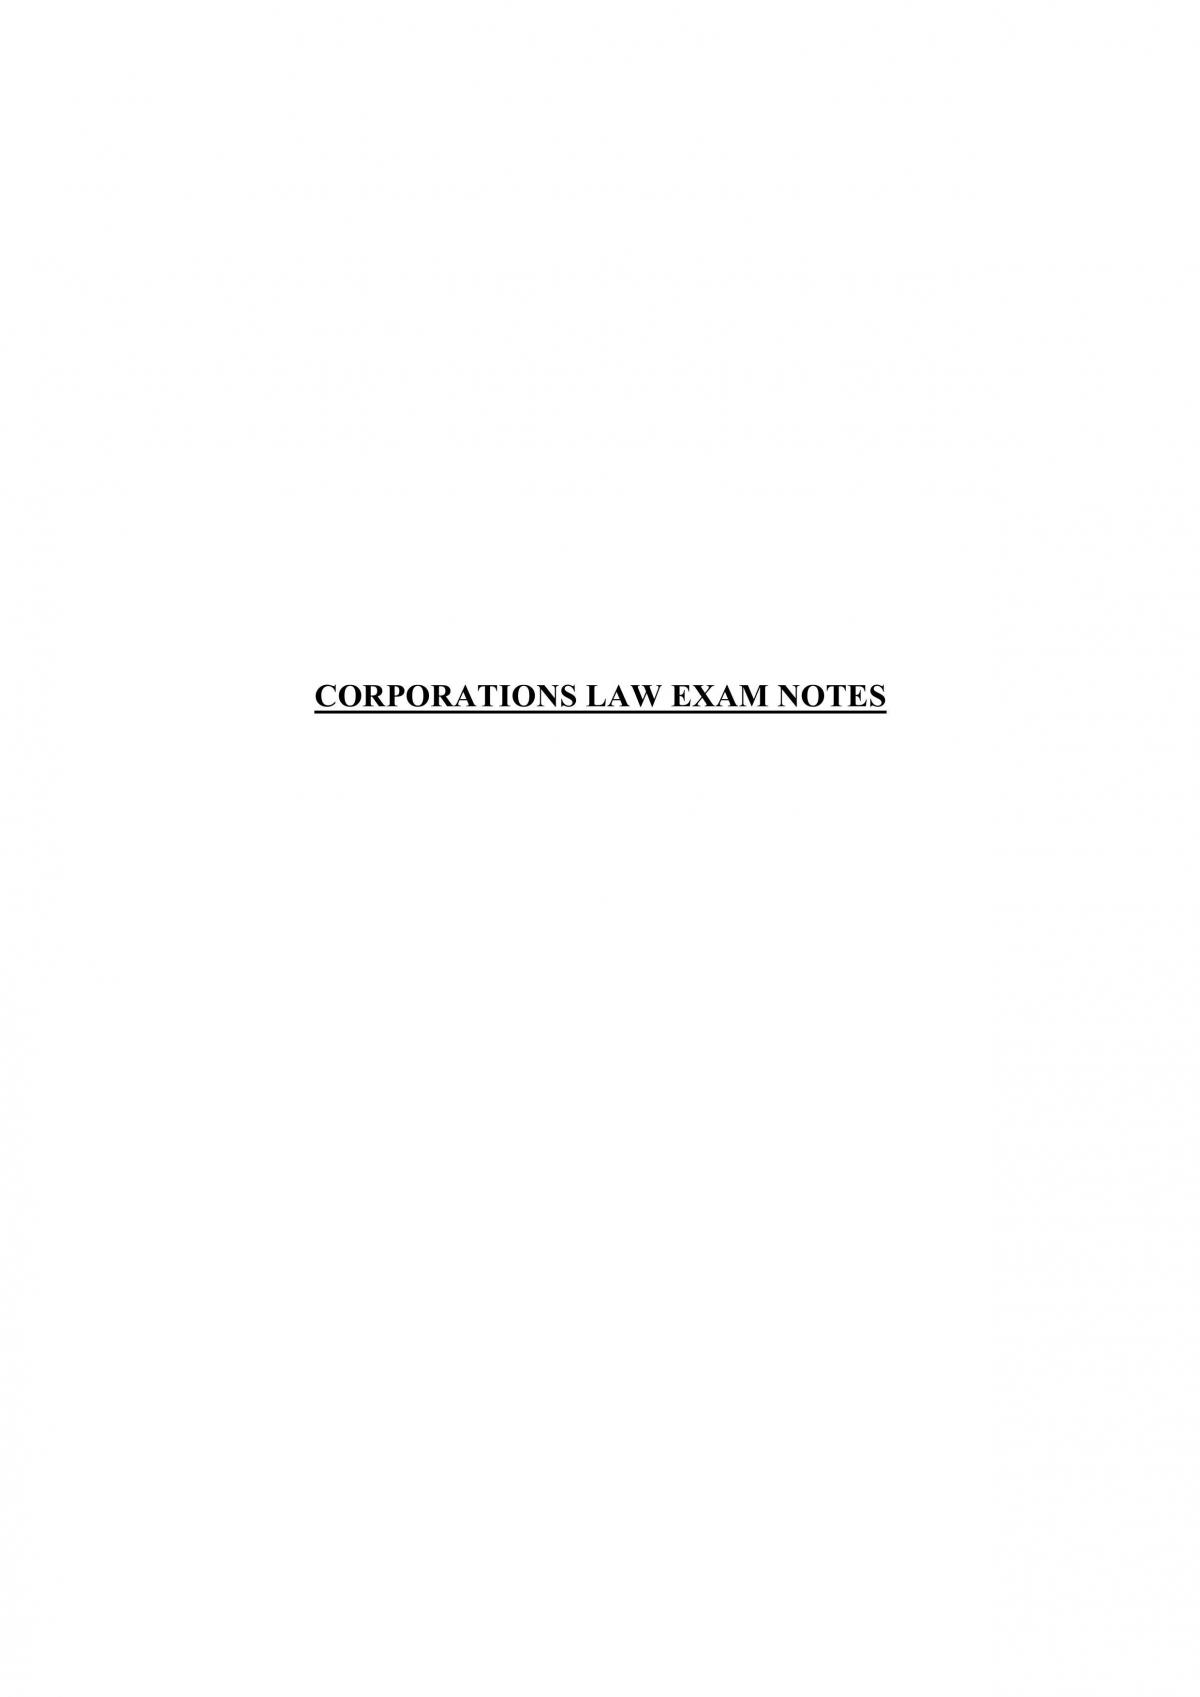 Corporations Law Exam Notes - Page 1